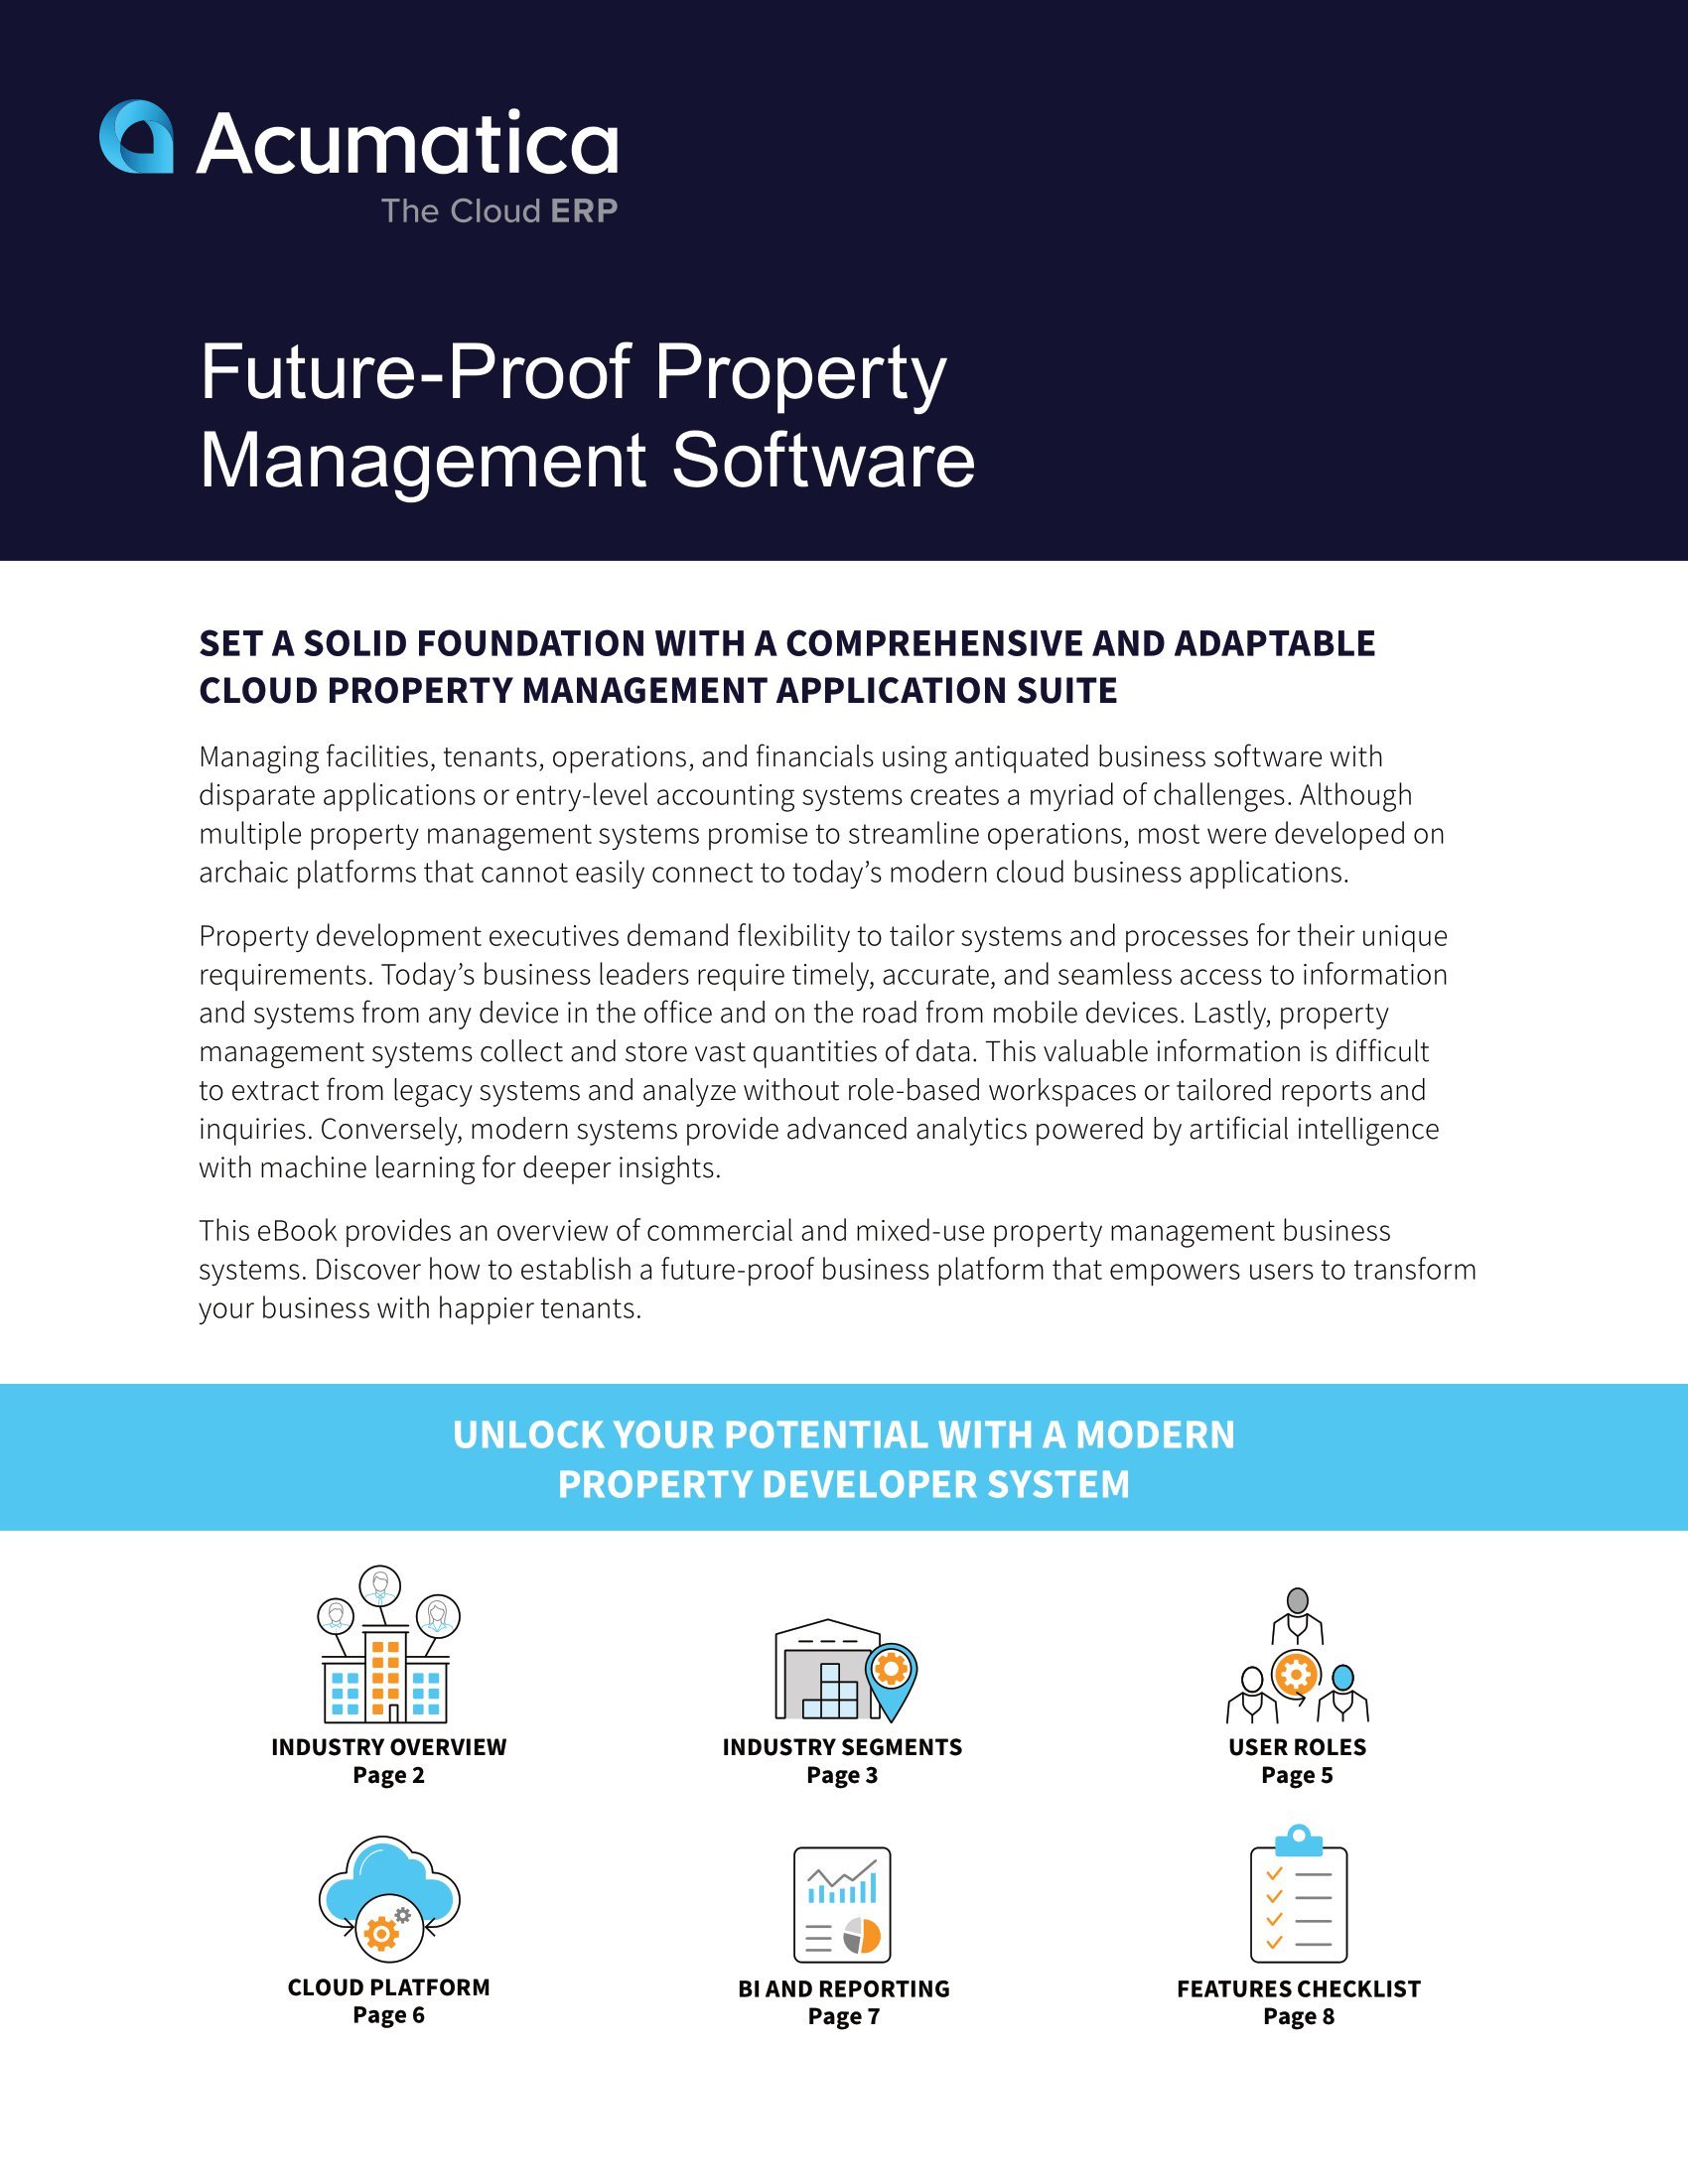 It is Time for Property Managers to Equip Themselves with a Modern Cloud-Based Property Management Solution